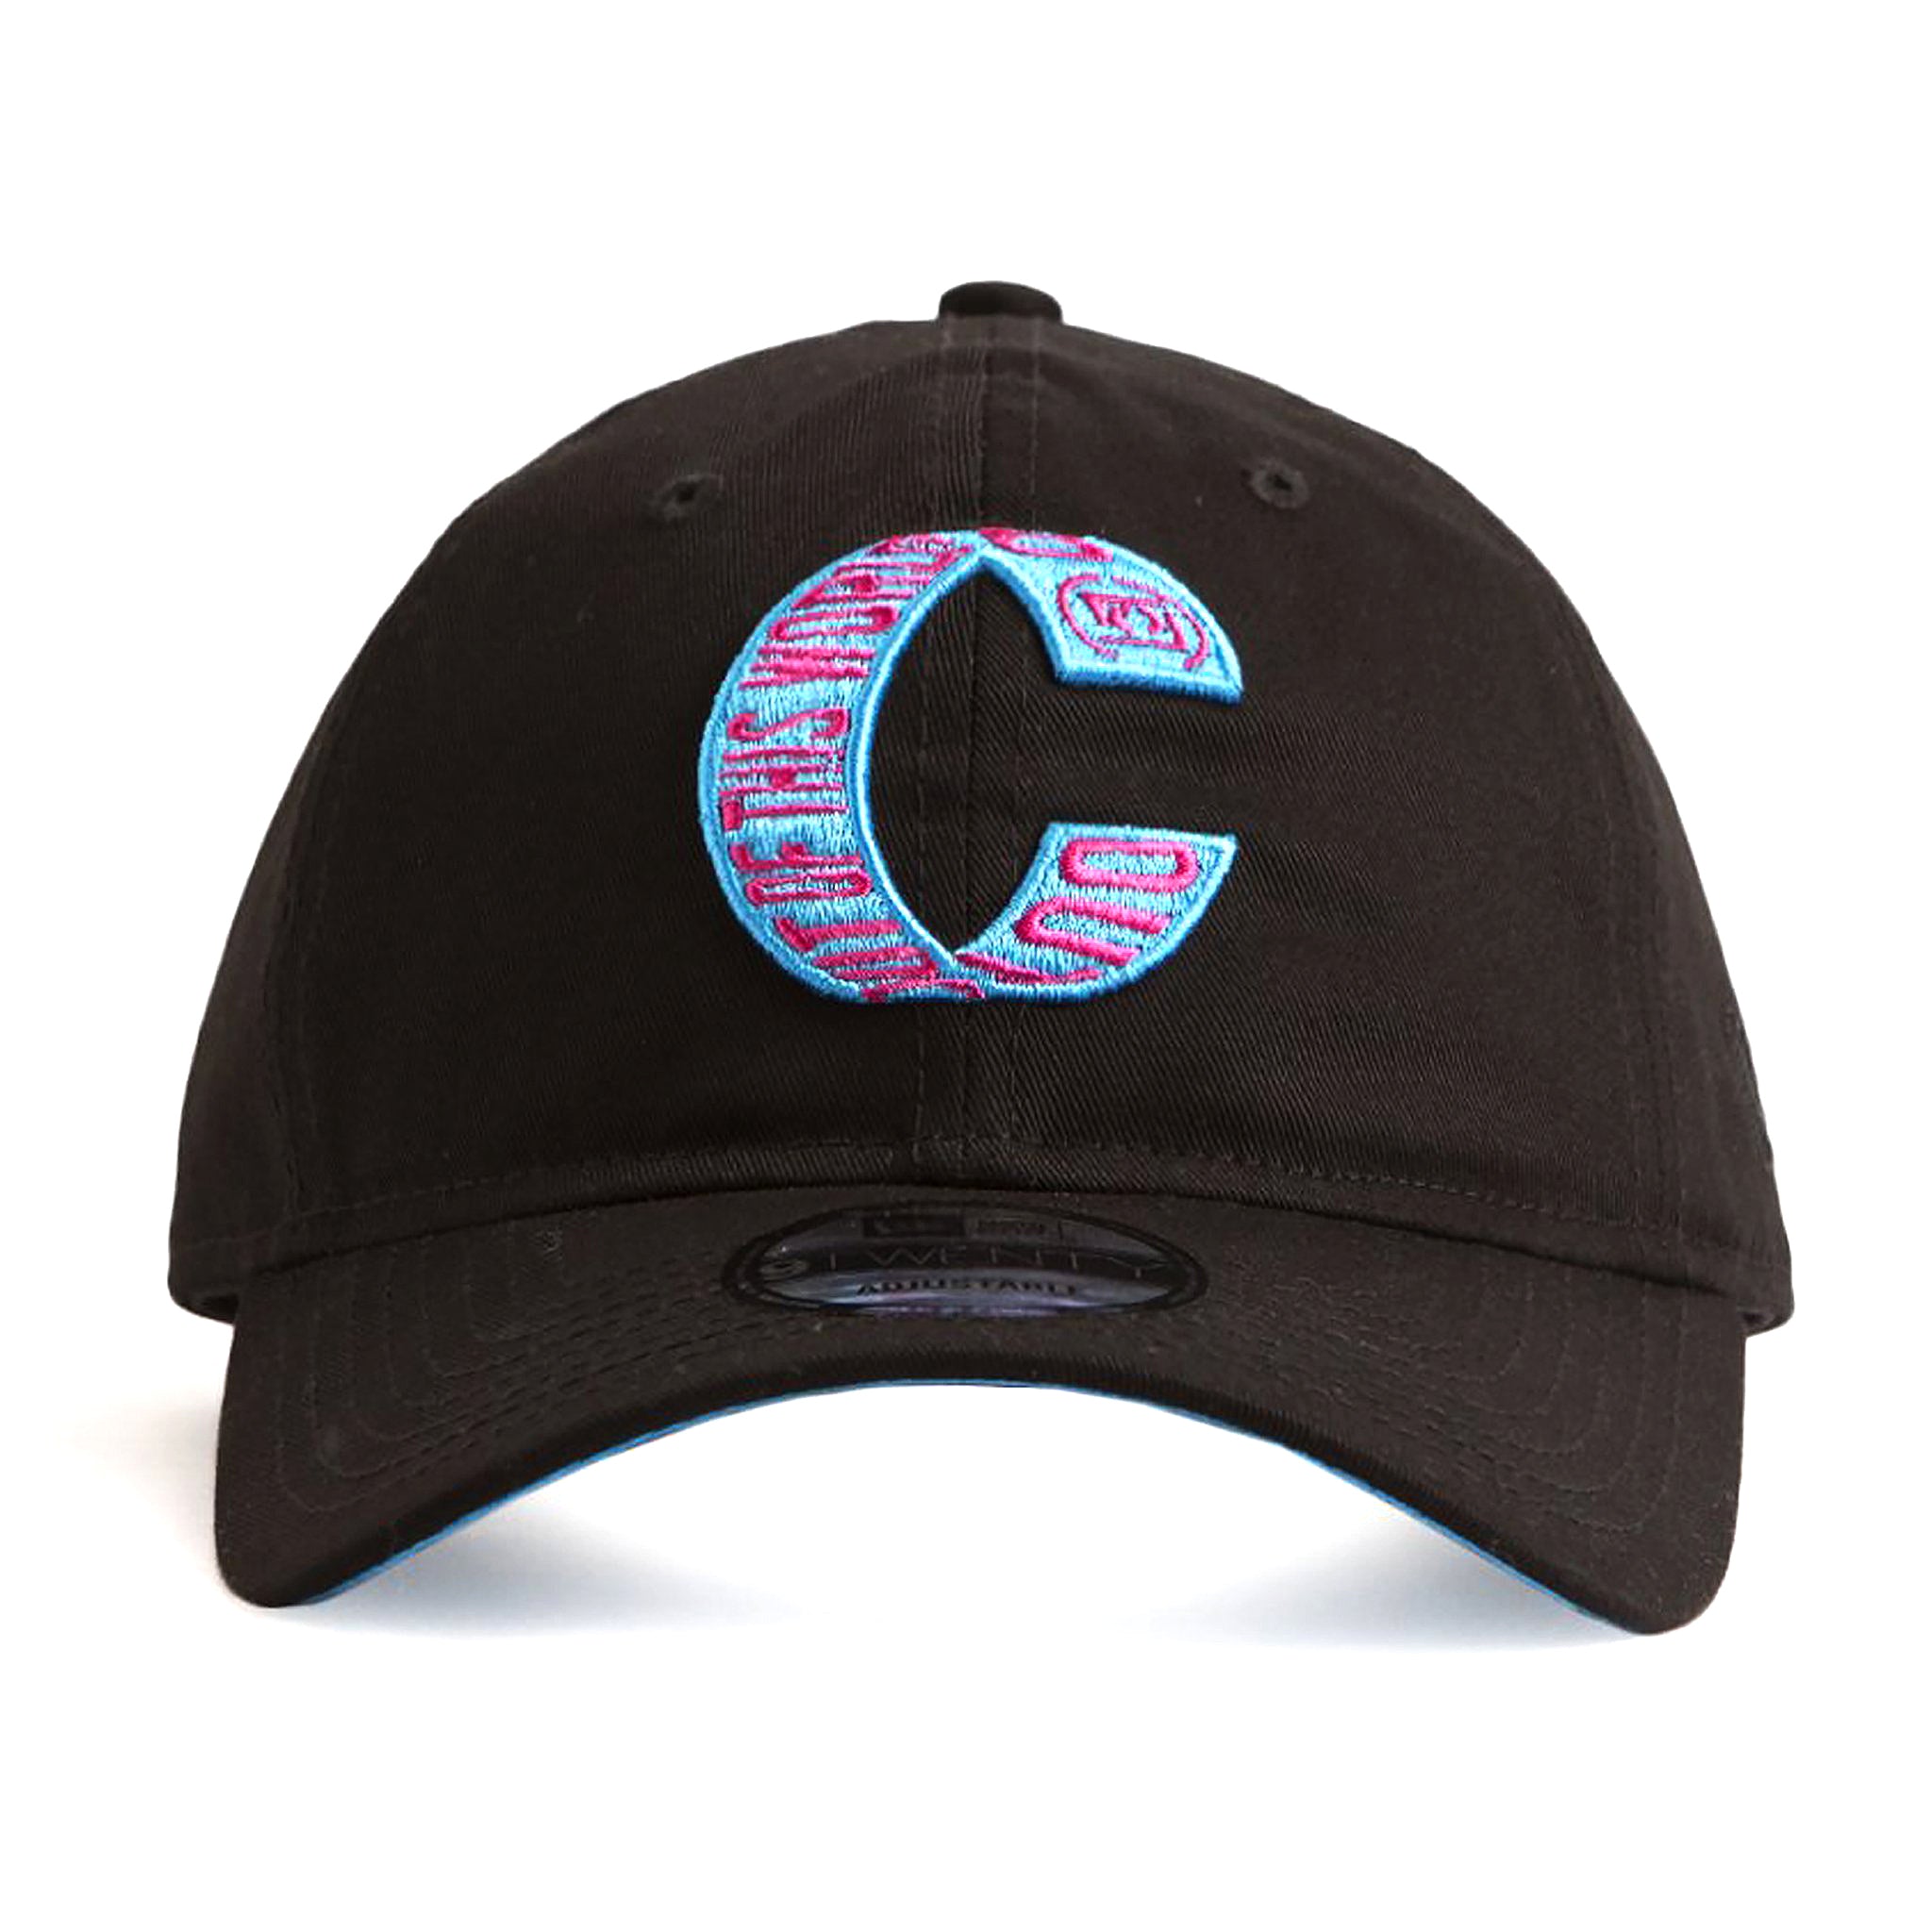 Clot Out Of This World Loop Cap Black